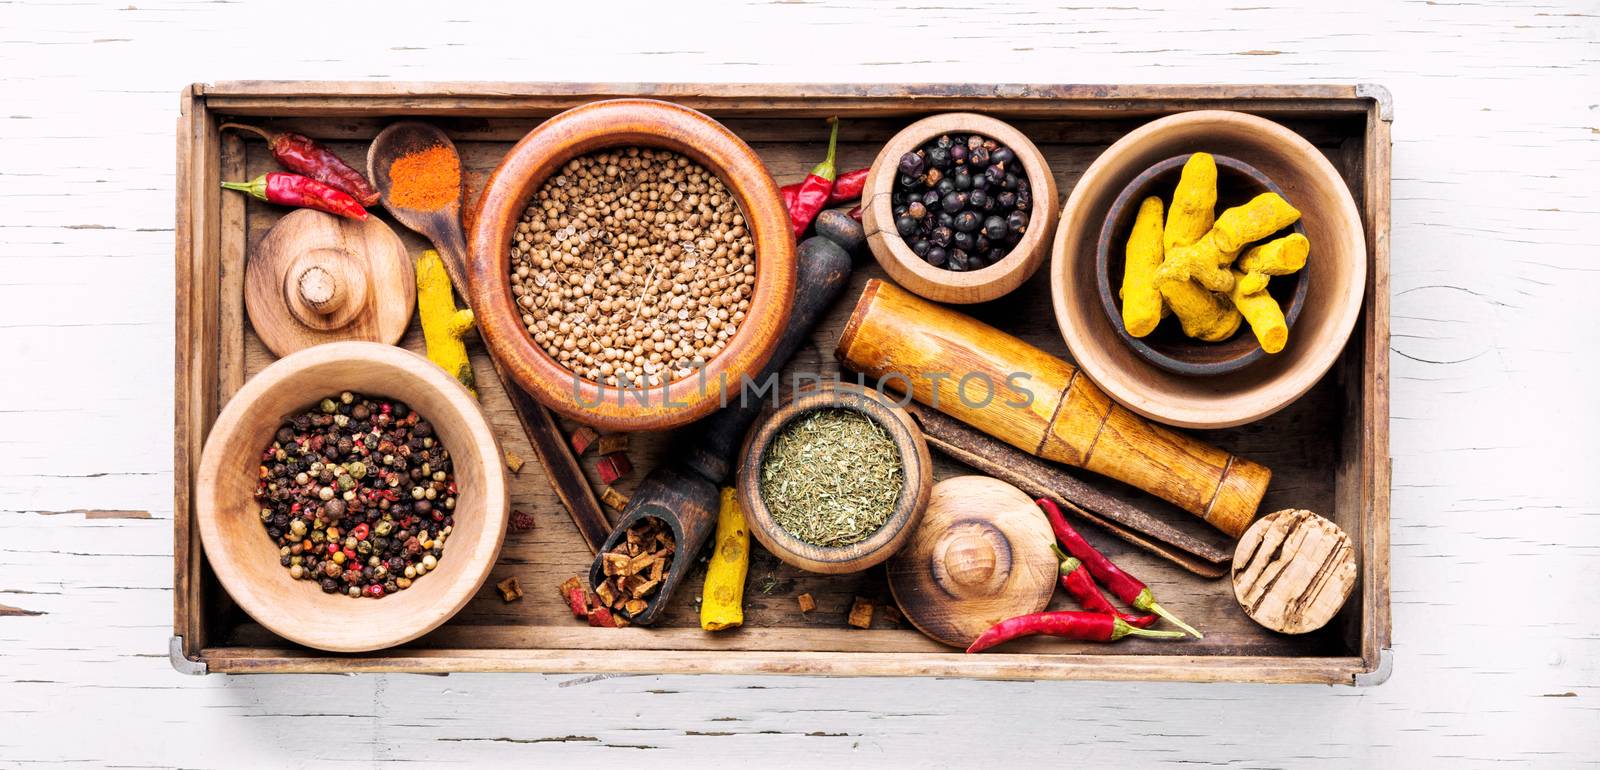 Spices ingredients for cooking by LMykola